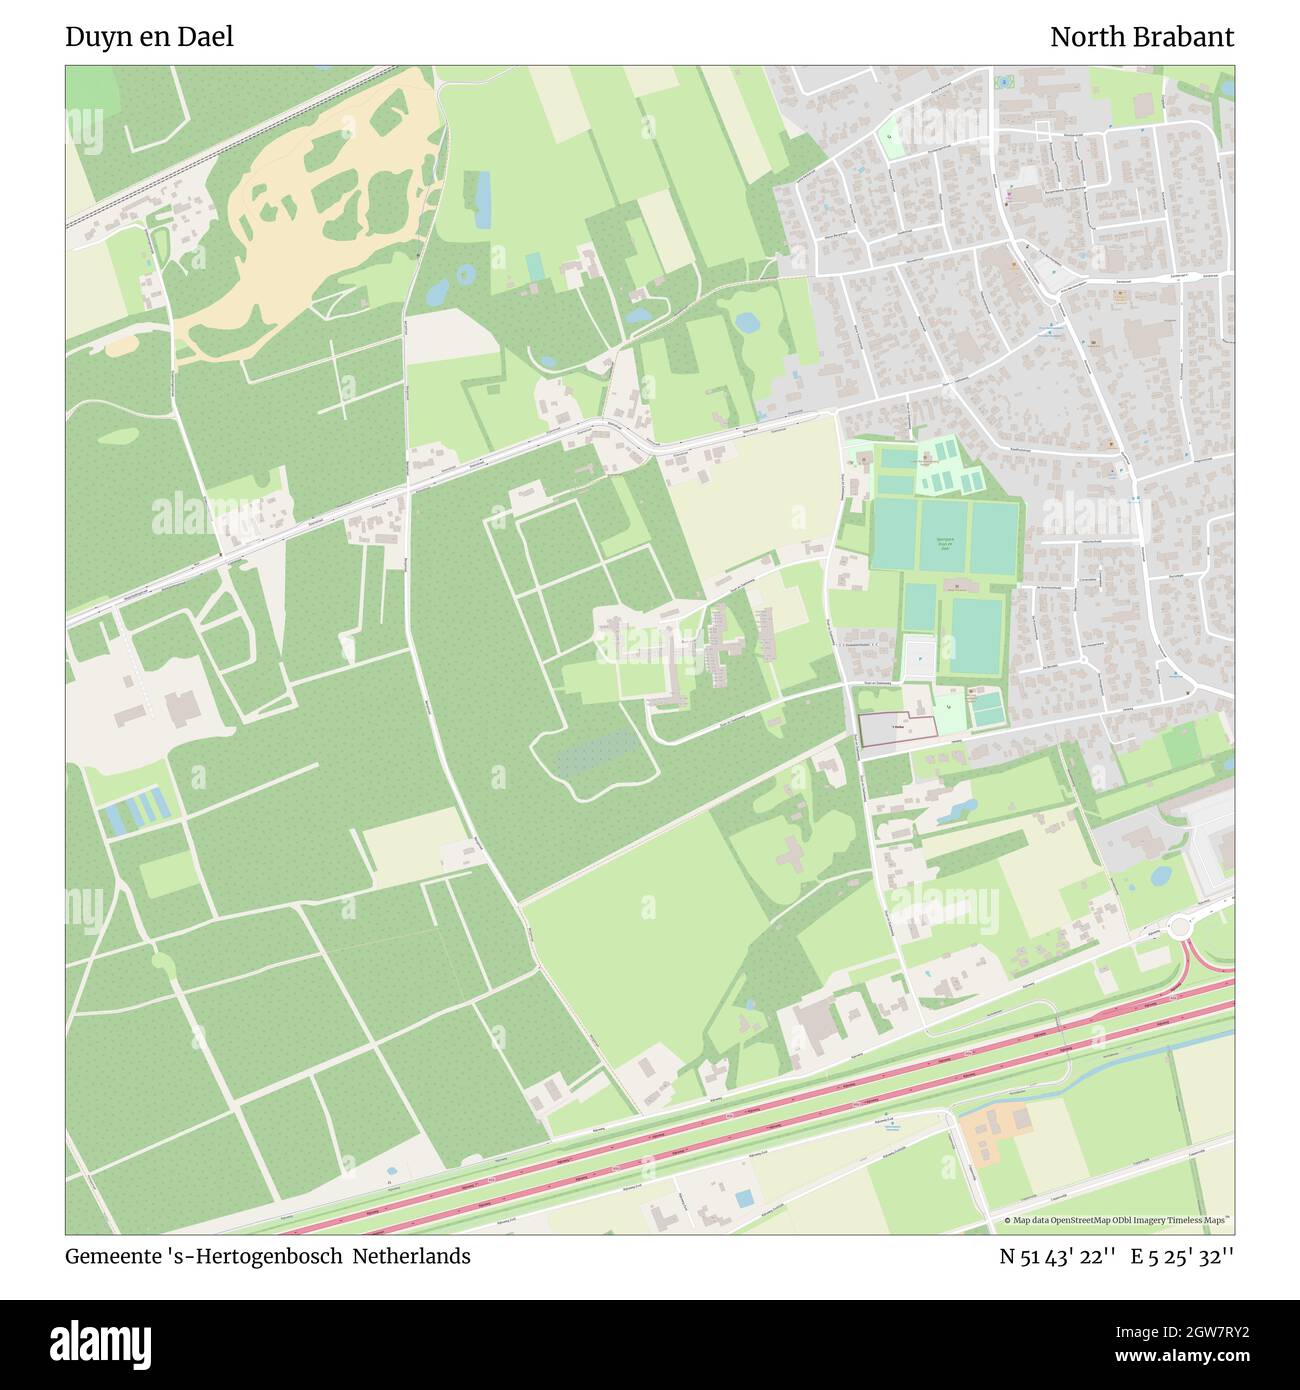 Duyn en Dael, Gemeente 's-Hertogenbosch, Netherlands, North Brabant, N 51 43' 22'', E 5 25' 32'', map, Timeless Map published in 2021. Travelers, explorers and adventurers like Florence Nightingale, David Livingstone, Ernest Shackleton, Lewis and Clark and Sherlock Holmes relied on maps to plan travels to the world's most remote corners, Timeless Maps is mapping most locations on the globe, showing the achievement of great dreams Stock Photo